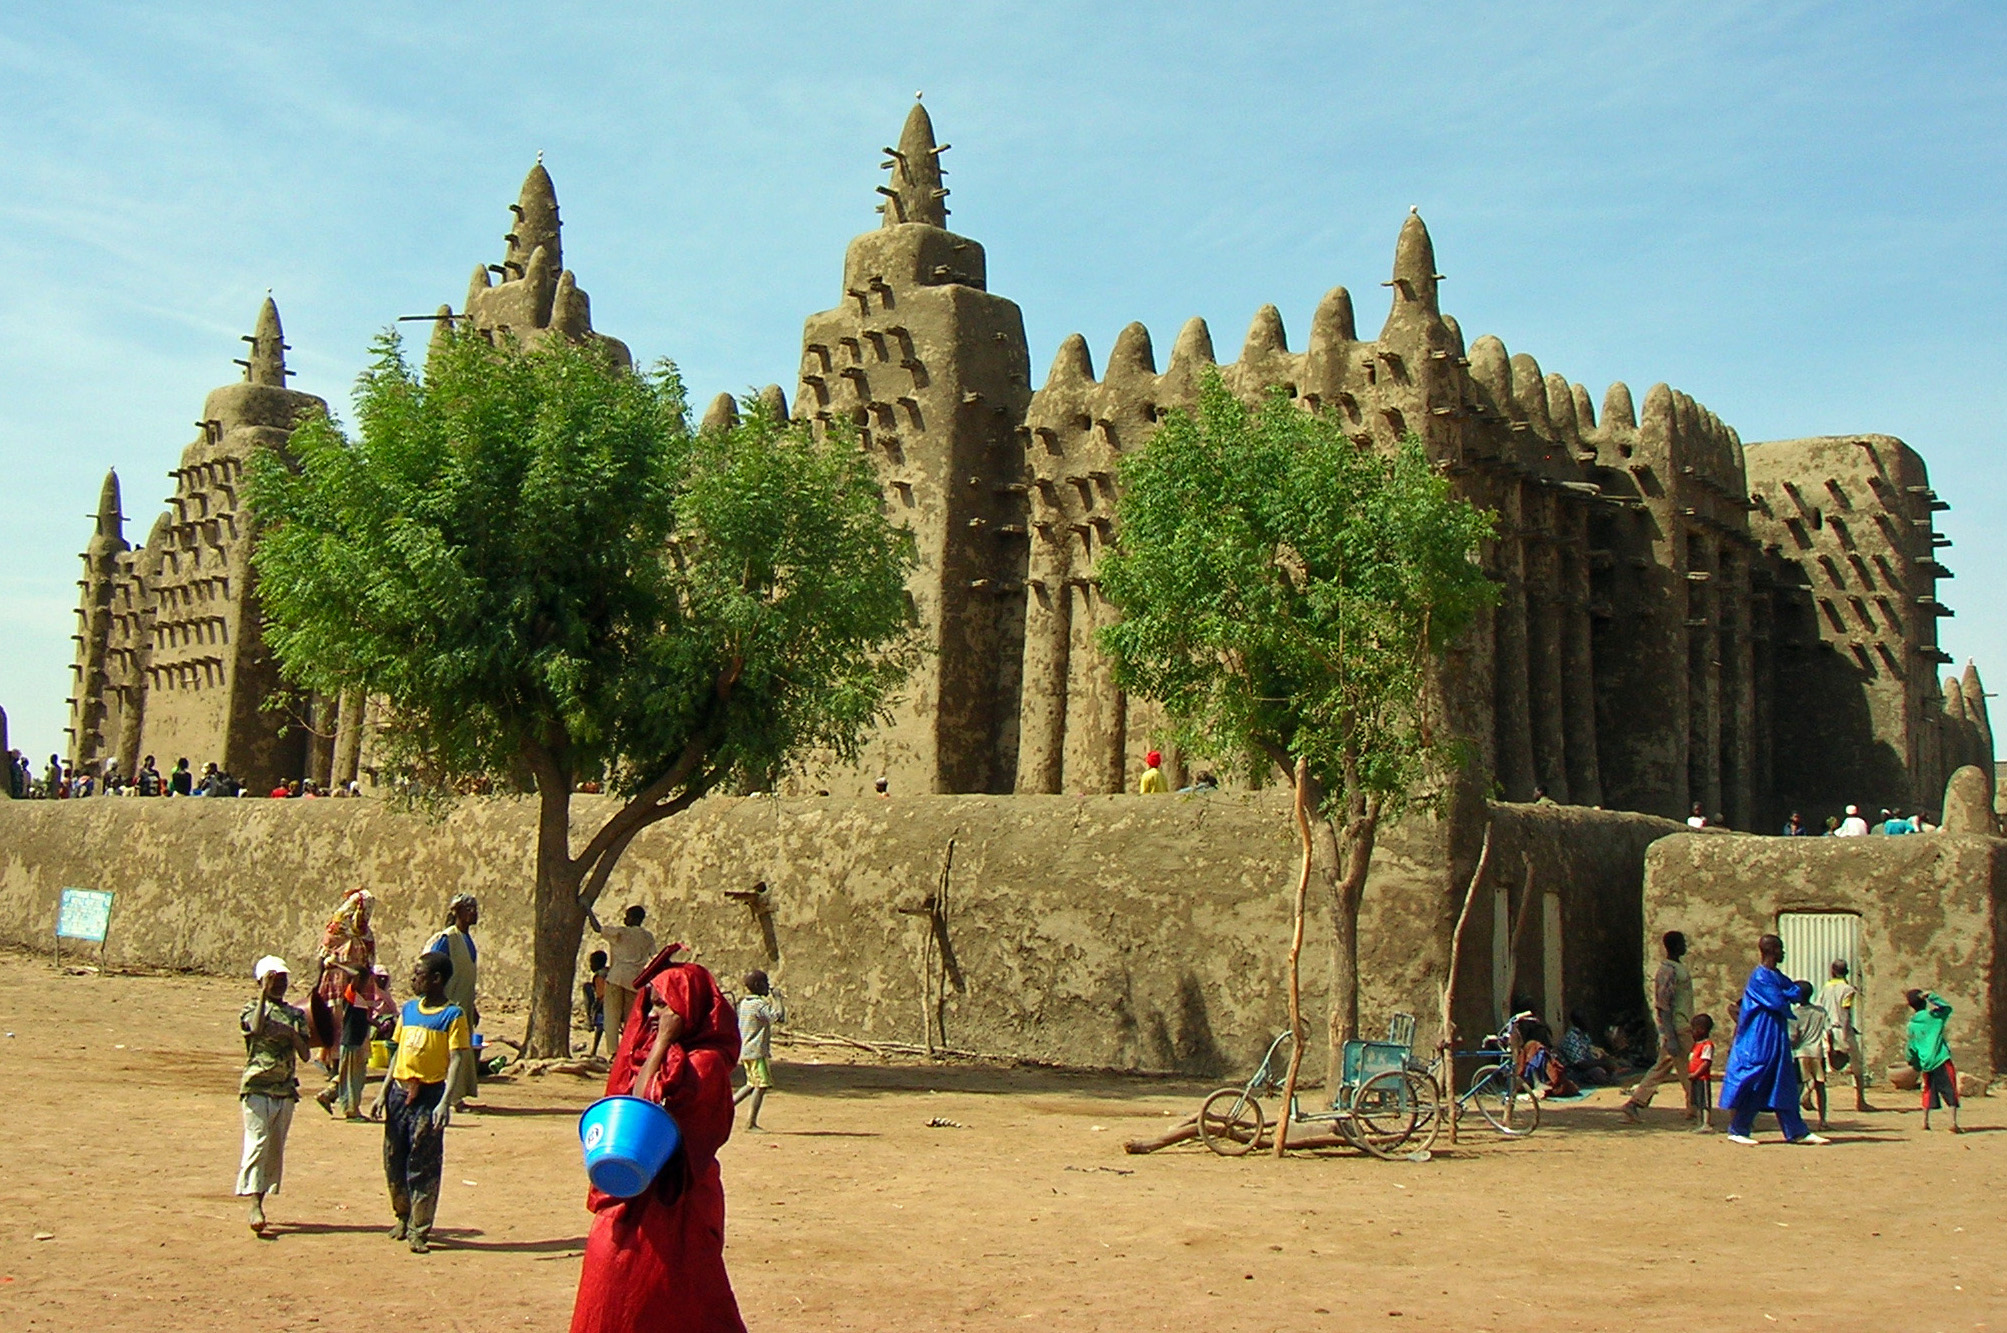 The Aga Khan Trust for Culture's programme in Earthen Architecture in Mali has facilitated the restoration of major religious sites, including the Great Mosque of Djenné – the largest mud-brick building in the world. Photo: AKTC/Cameron Rashti